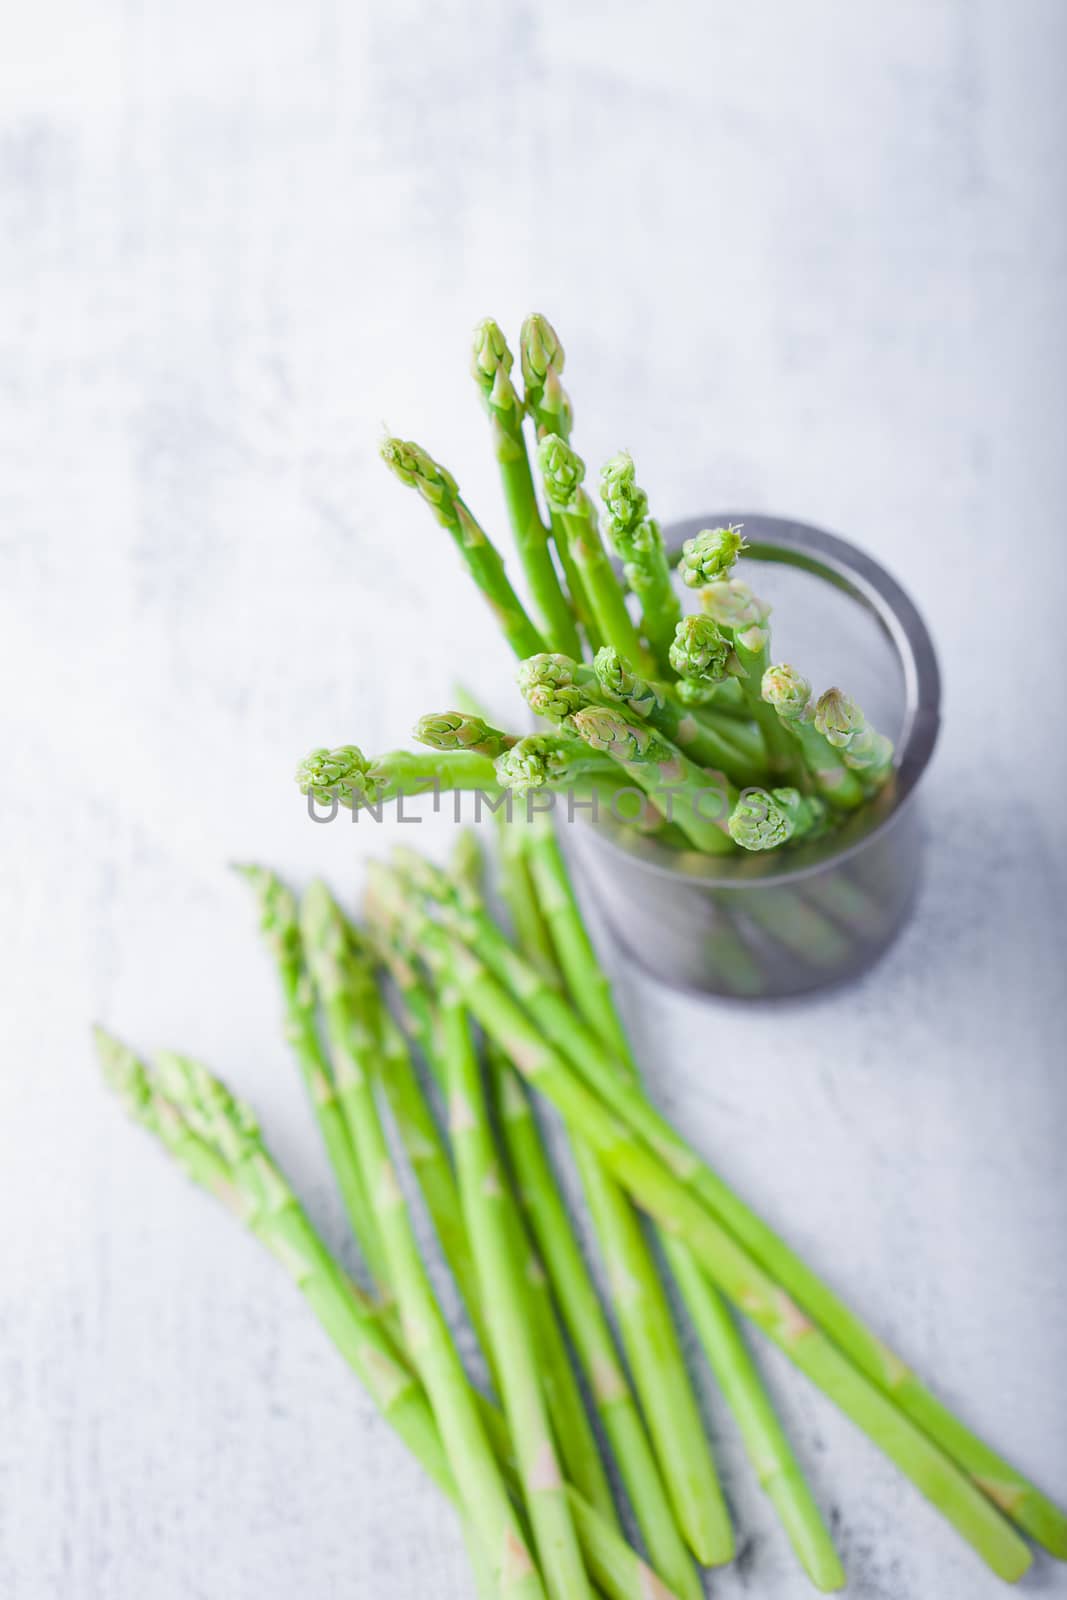 Bunch of green and fresh Asparagus by supercat67